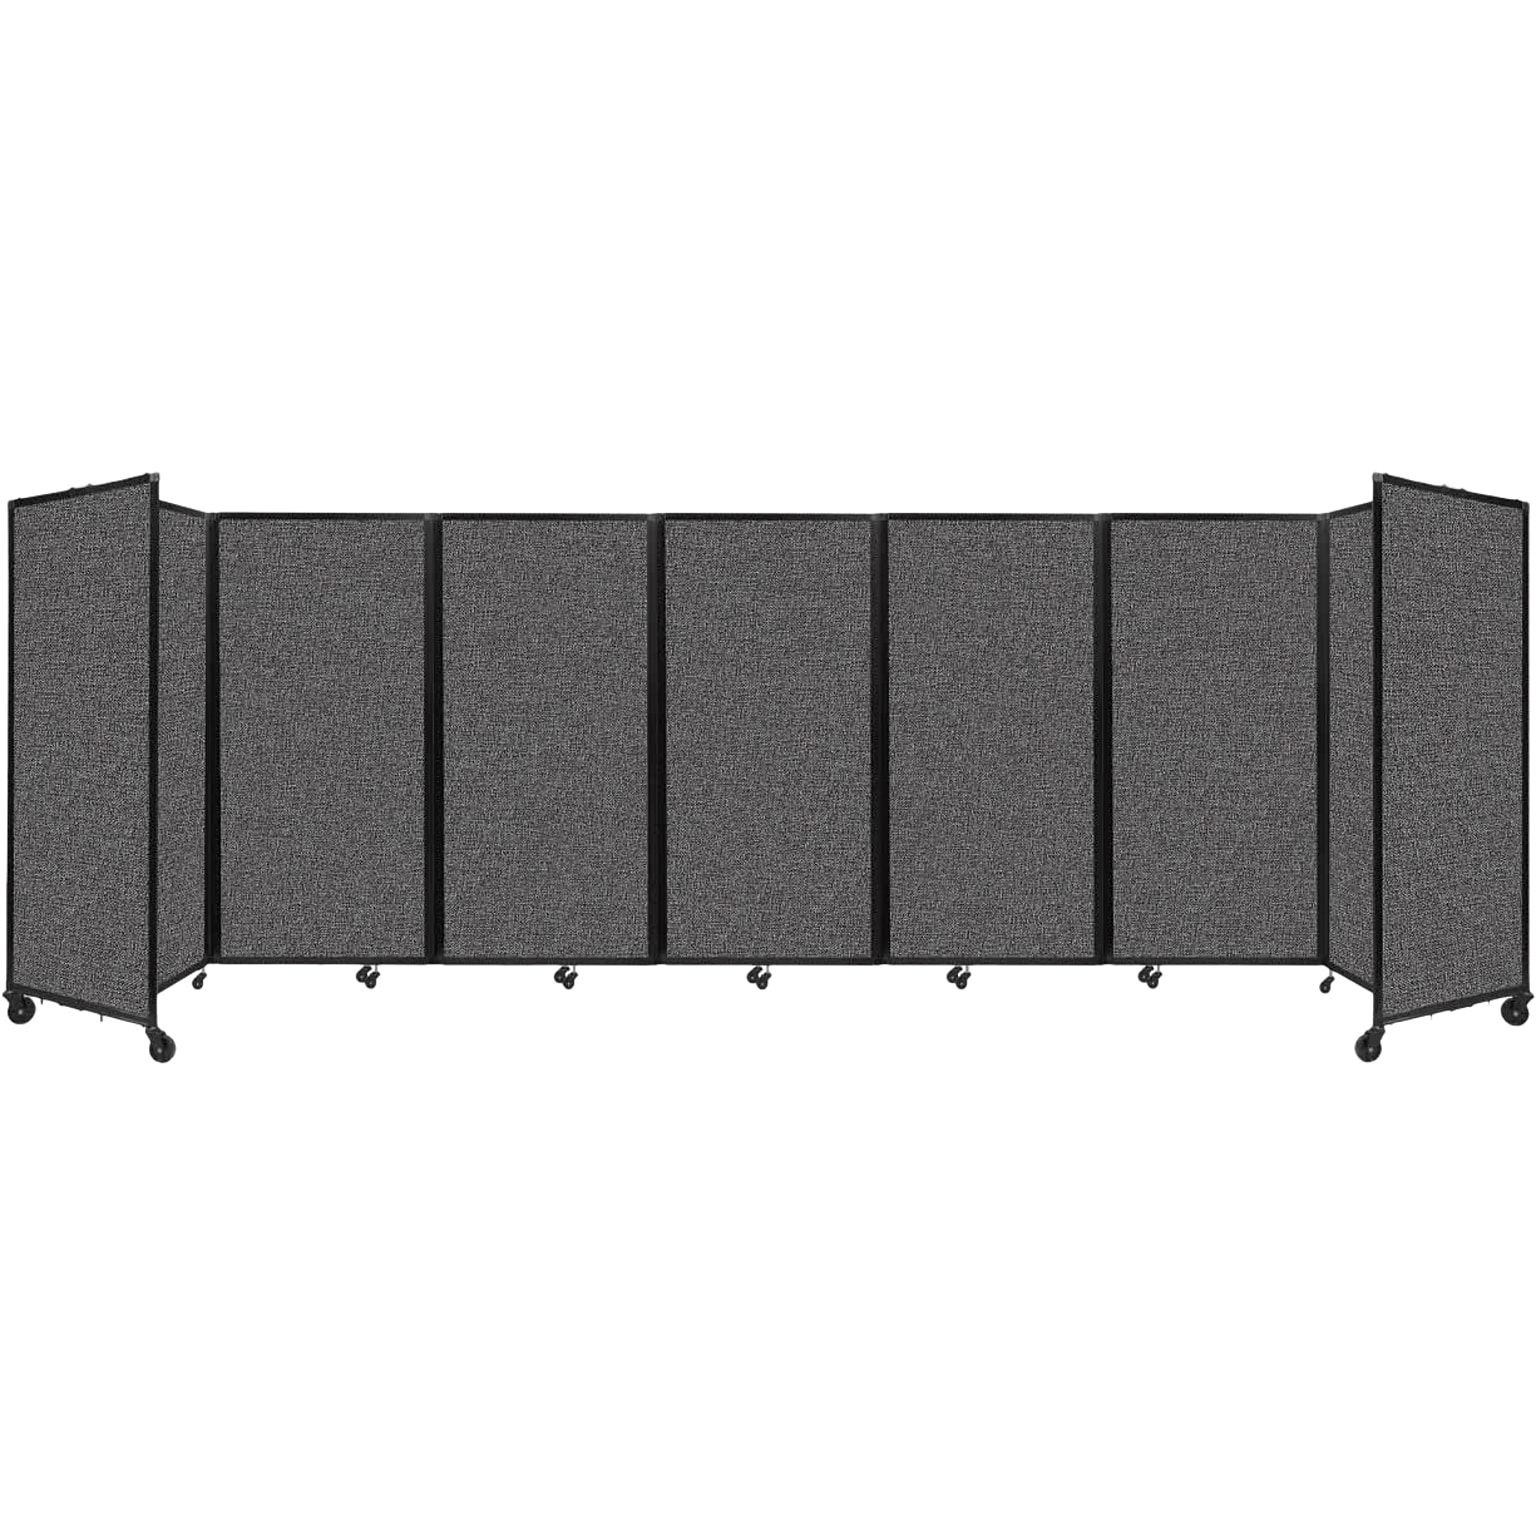 Versare The Room Divider 360 Freestanding Mobile Partition, 72H x 234W, Charcoal Gray Fabric (1172707)